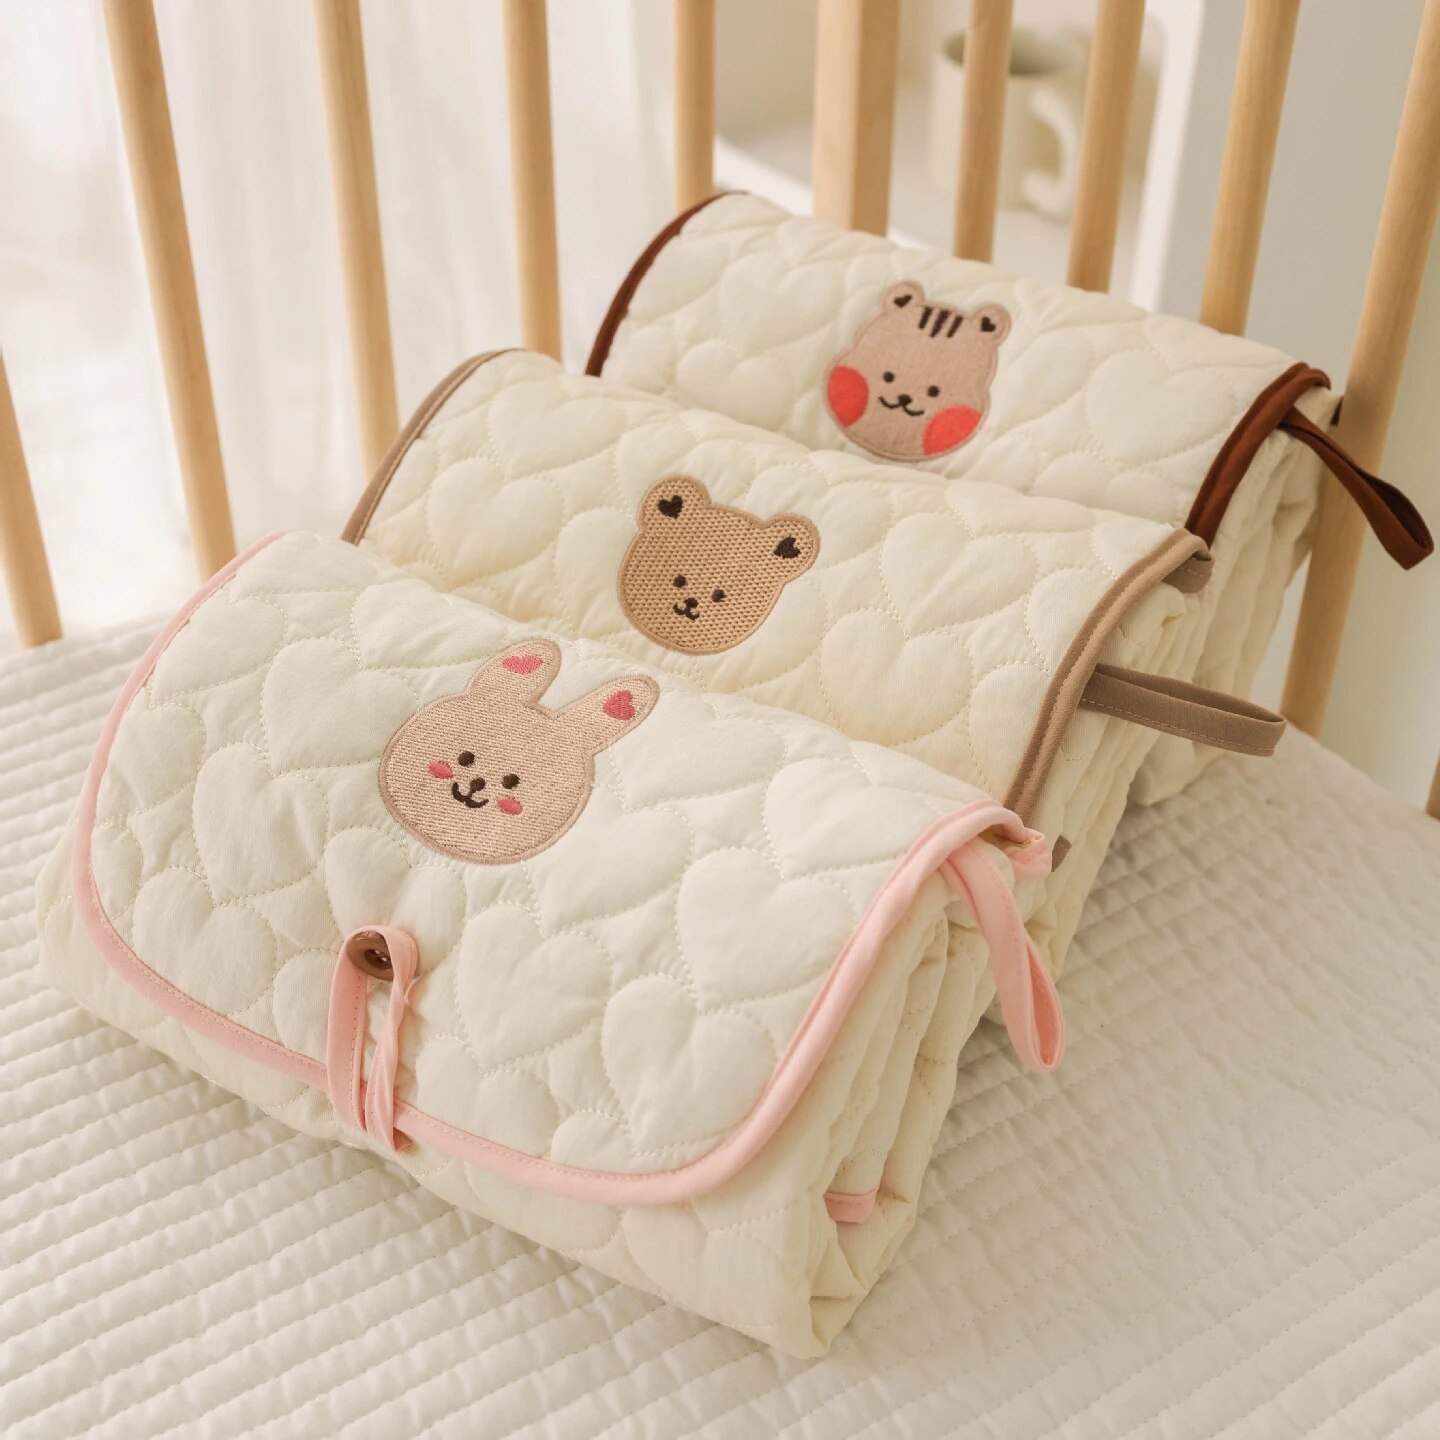 Waterproof Baby Diaper Mat Portable Cotton Changing Pad Cover For Newborn